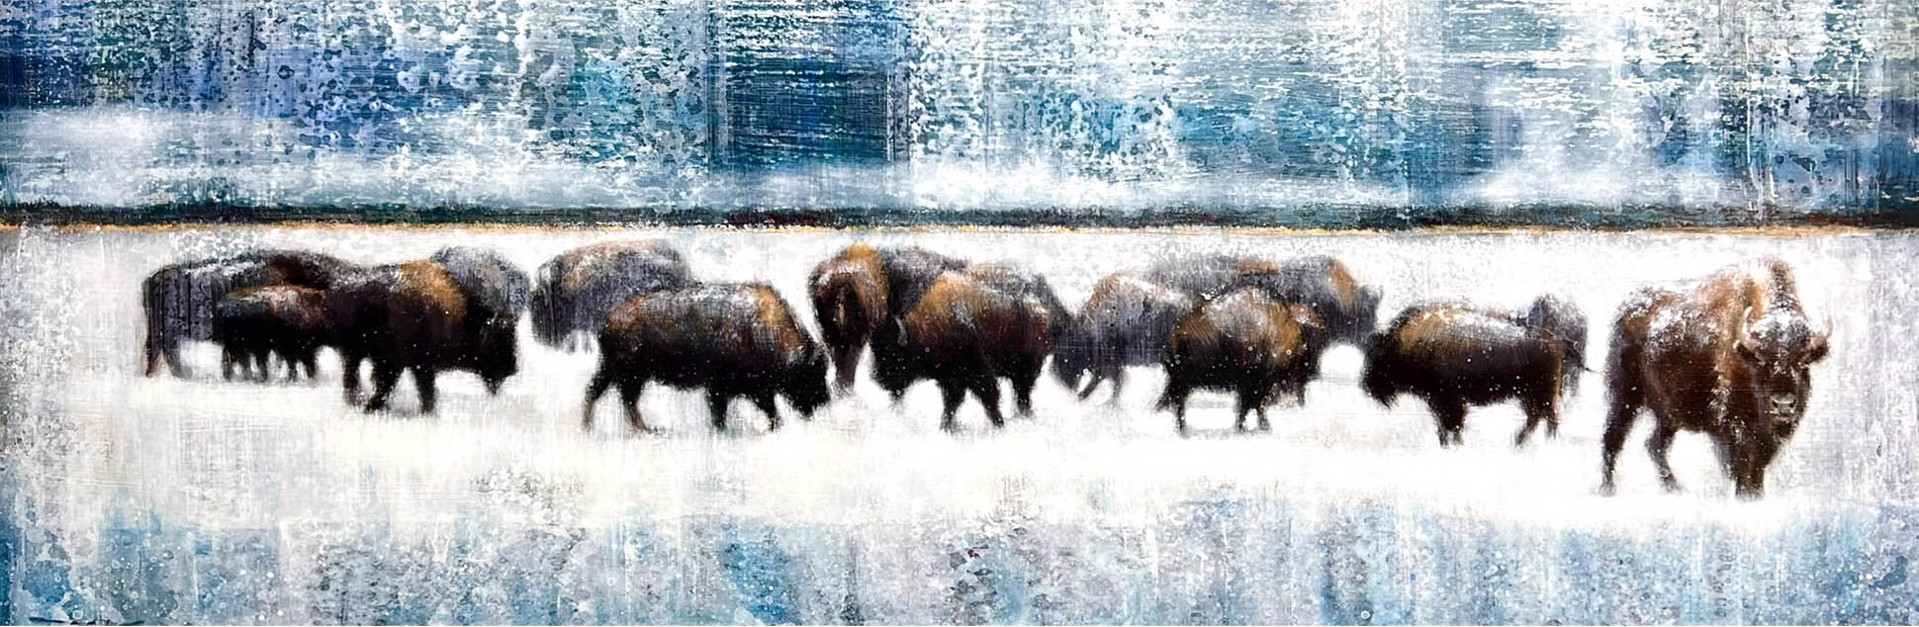 Horizontal Painting Of Bison Herd In A Blue And White Background